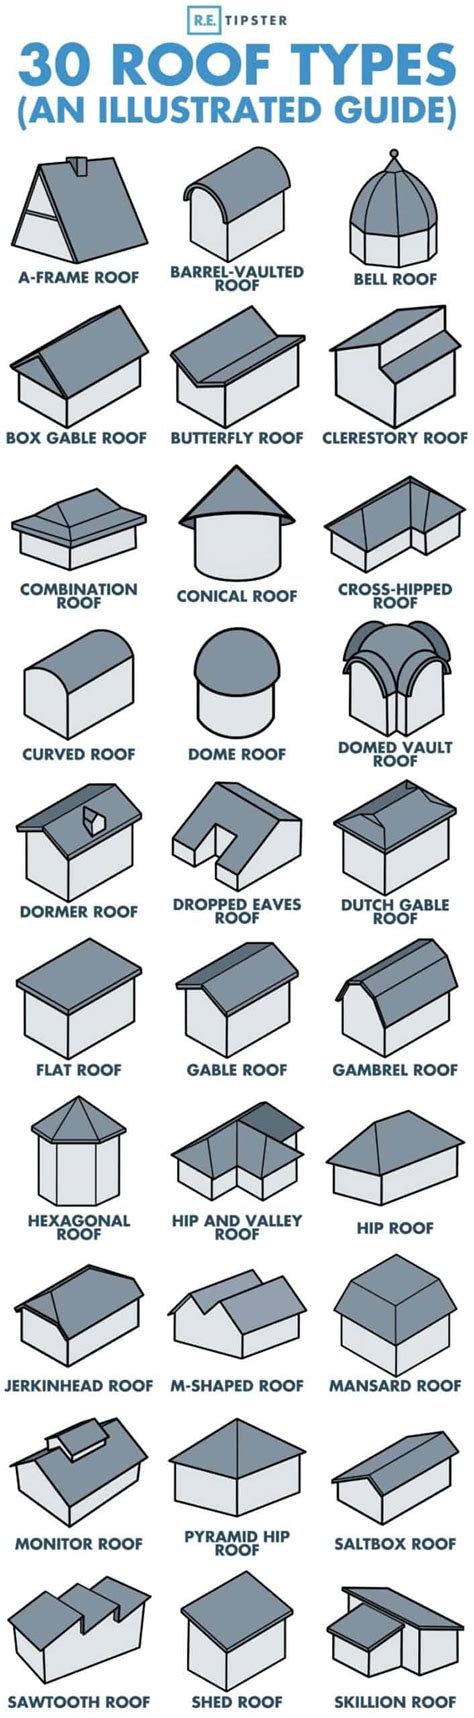 Roof Types And Styles Examples And Illustrations Included Retipster